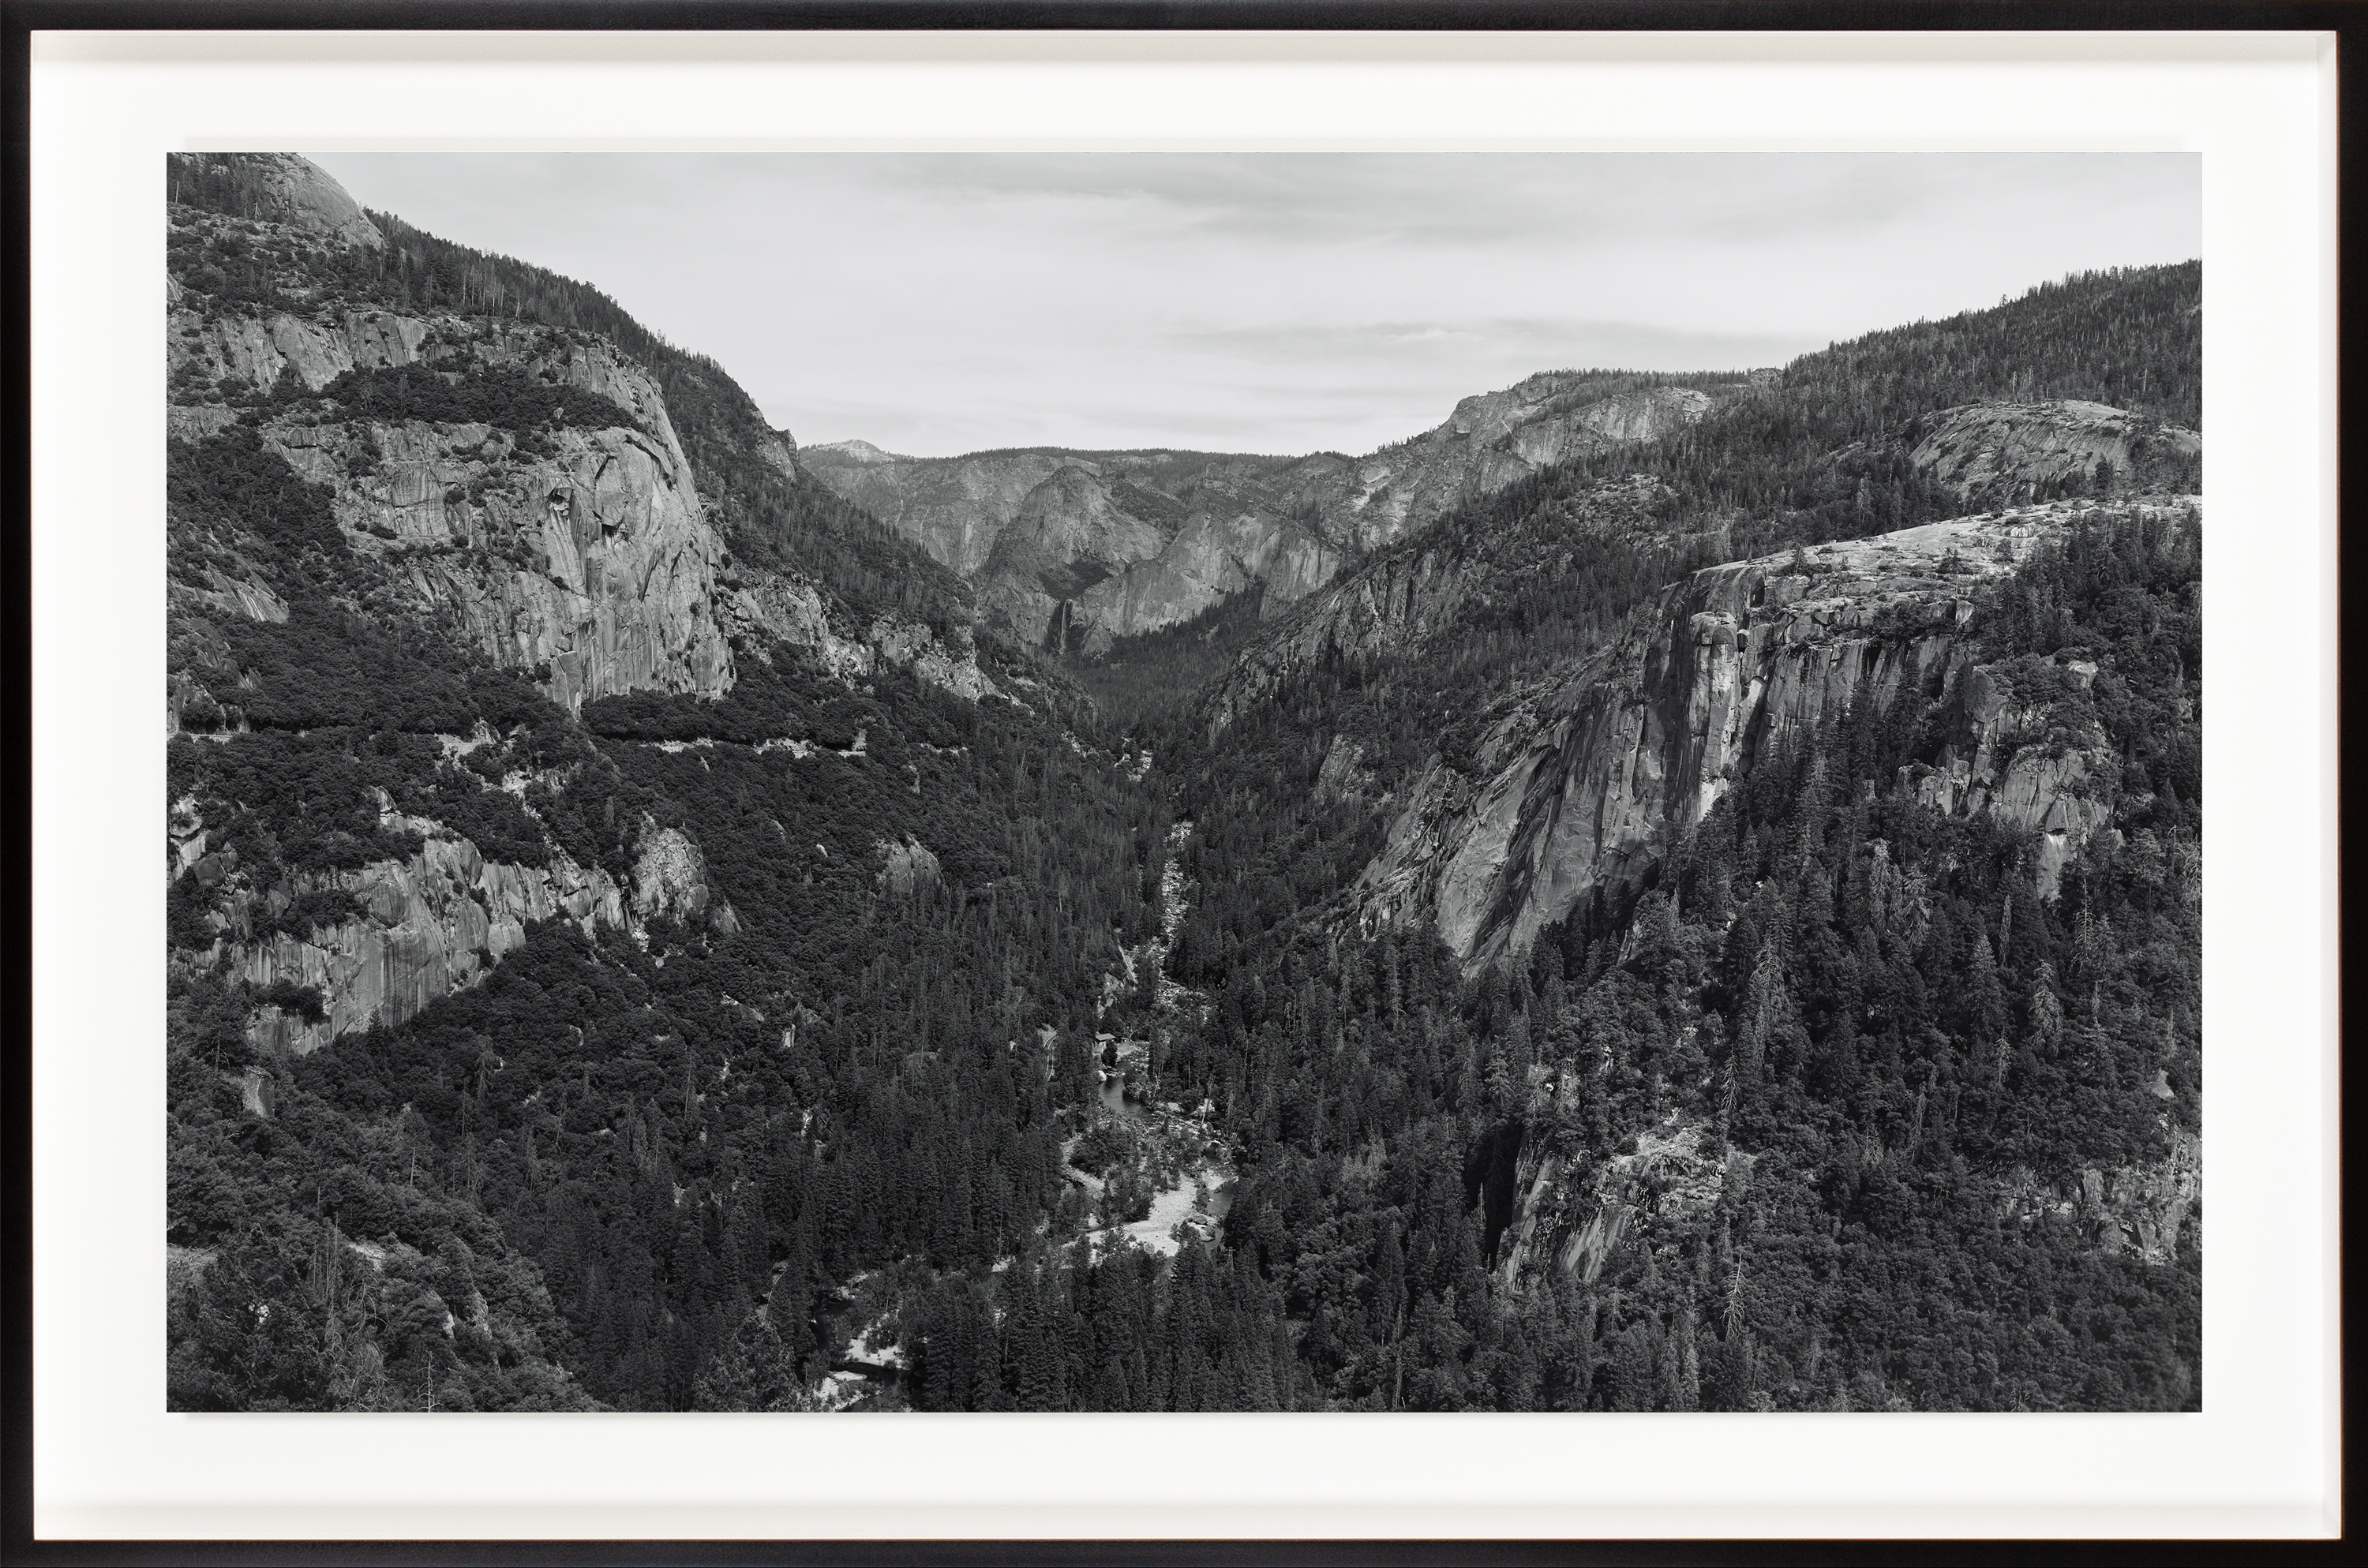 Black and white photograph of Yosemite valley with river running through middle framed in black